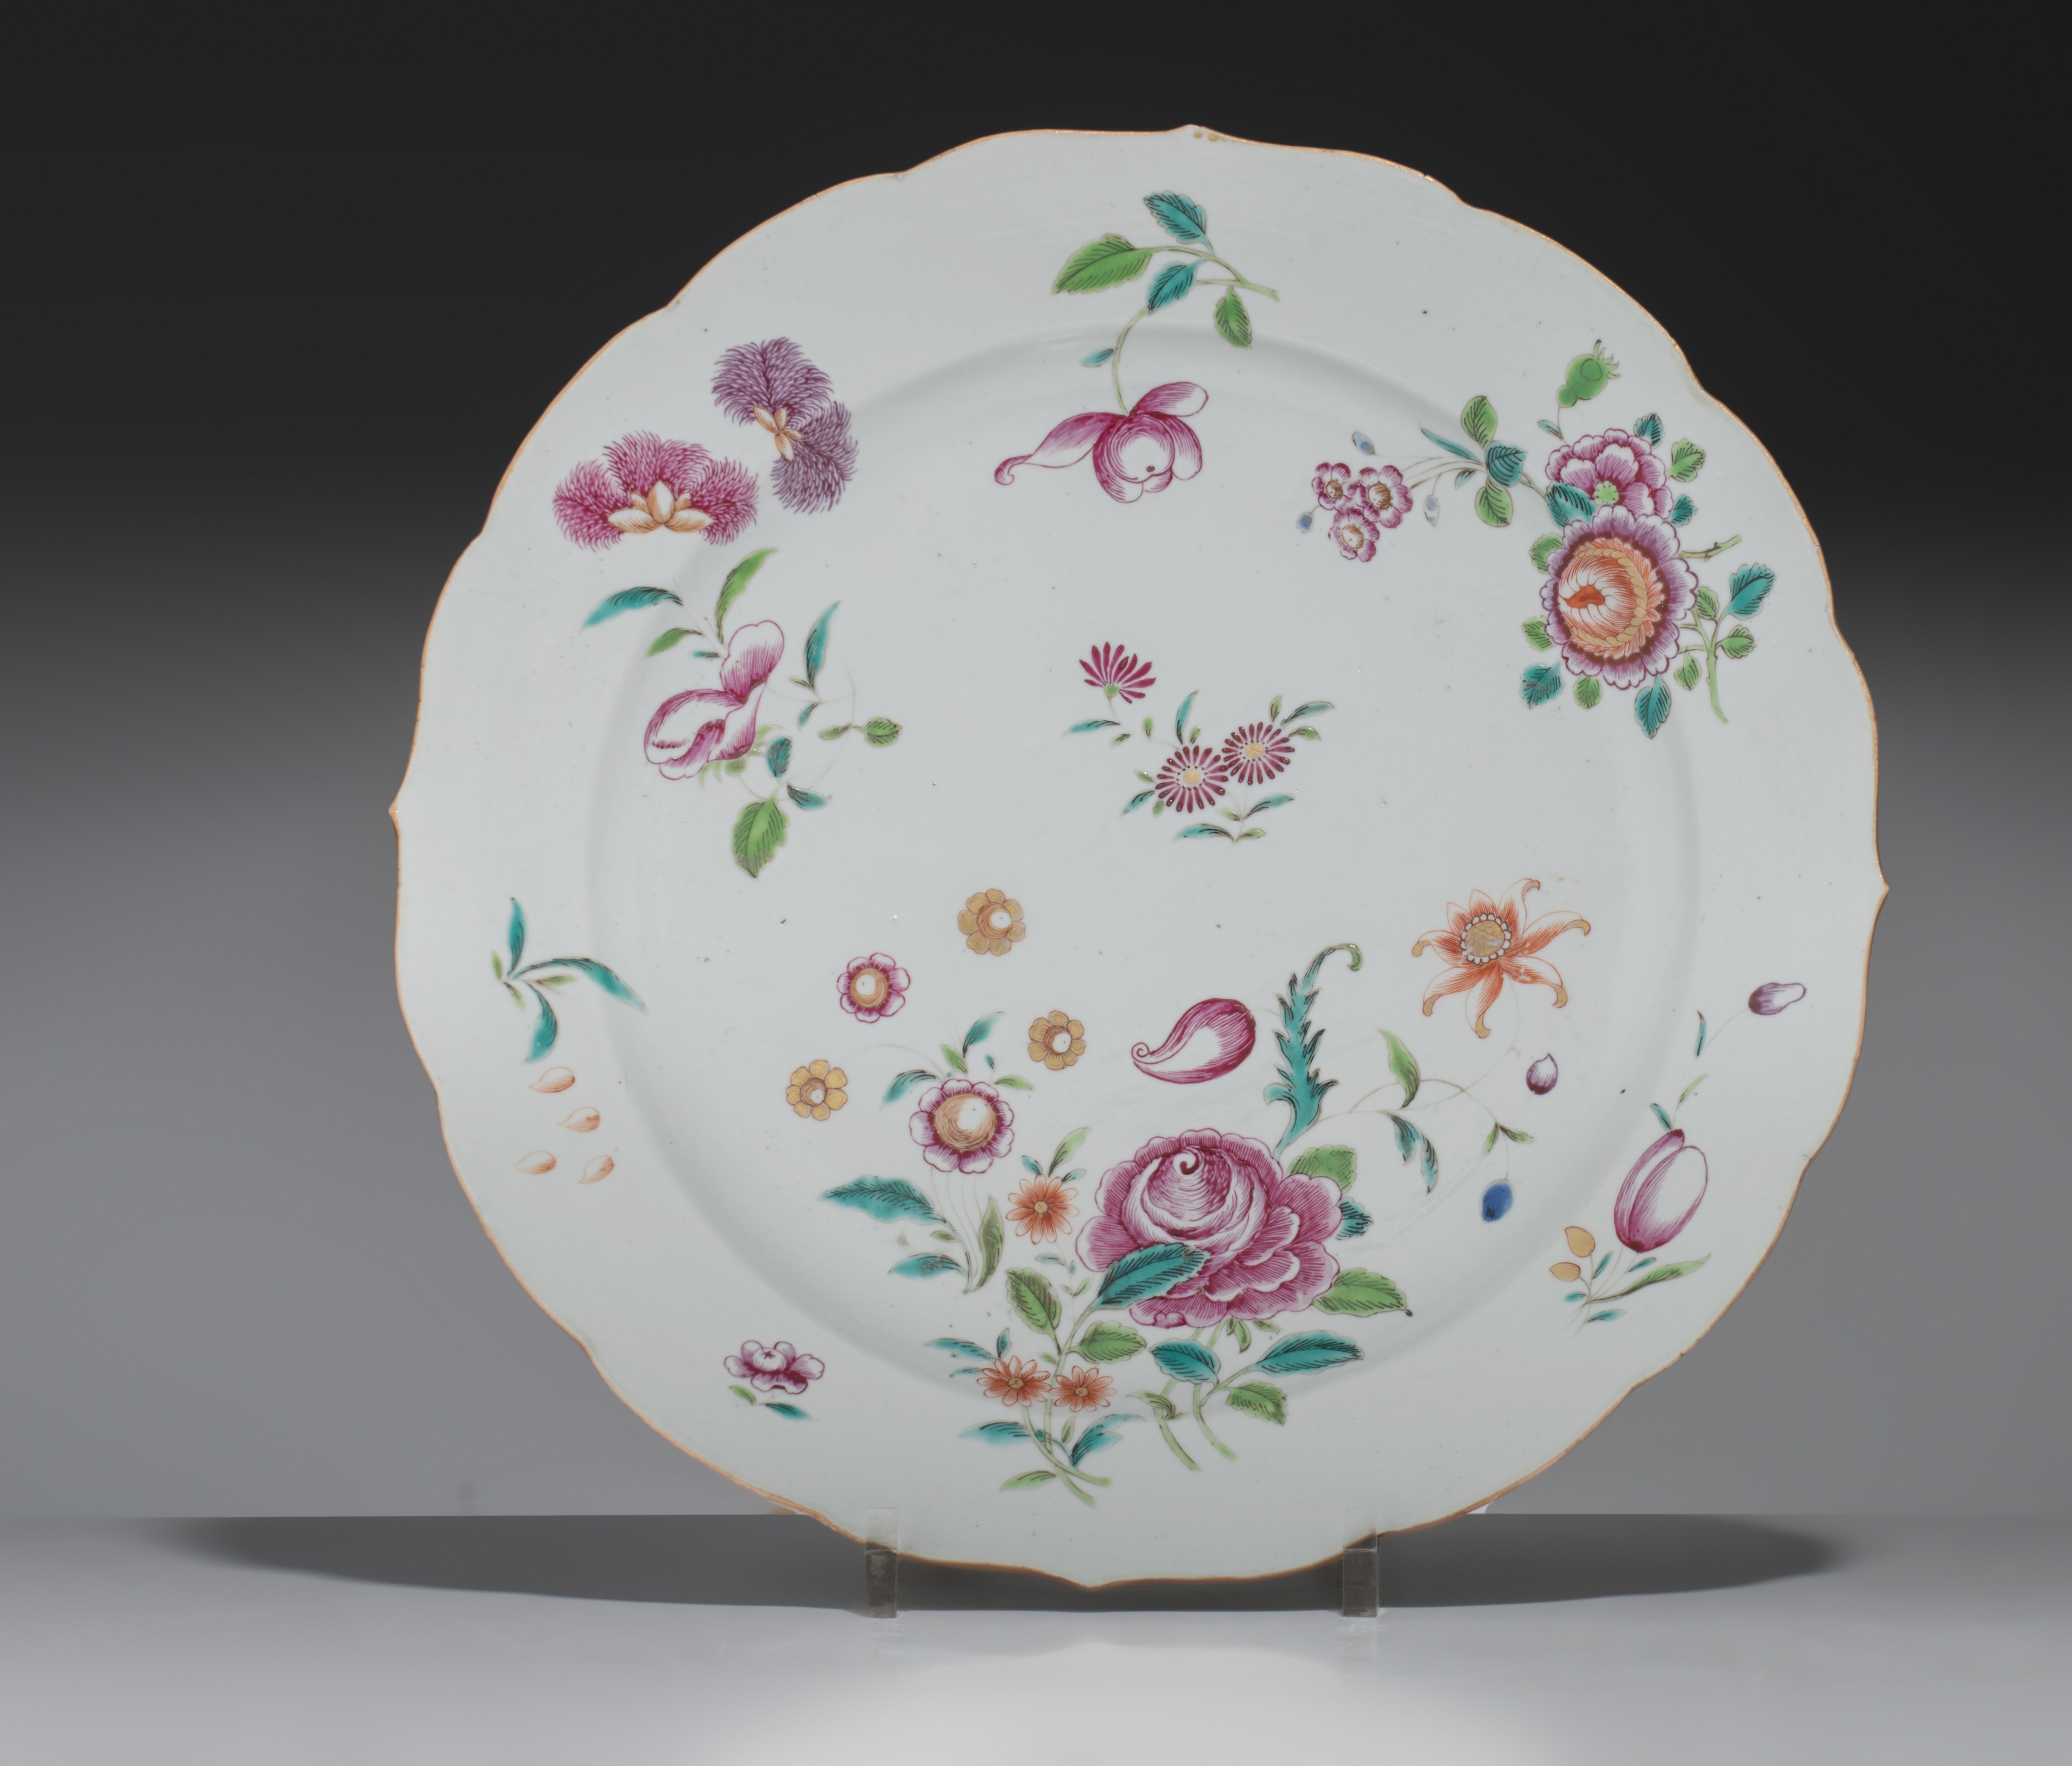 Three Chinese famille rose foliate-shaped export porcelain chargers, 18thC, ø 34,5 - 38 cm - Image 2 of 7